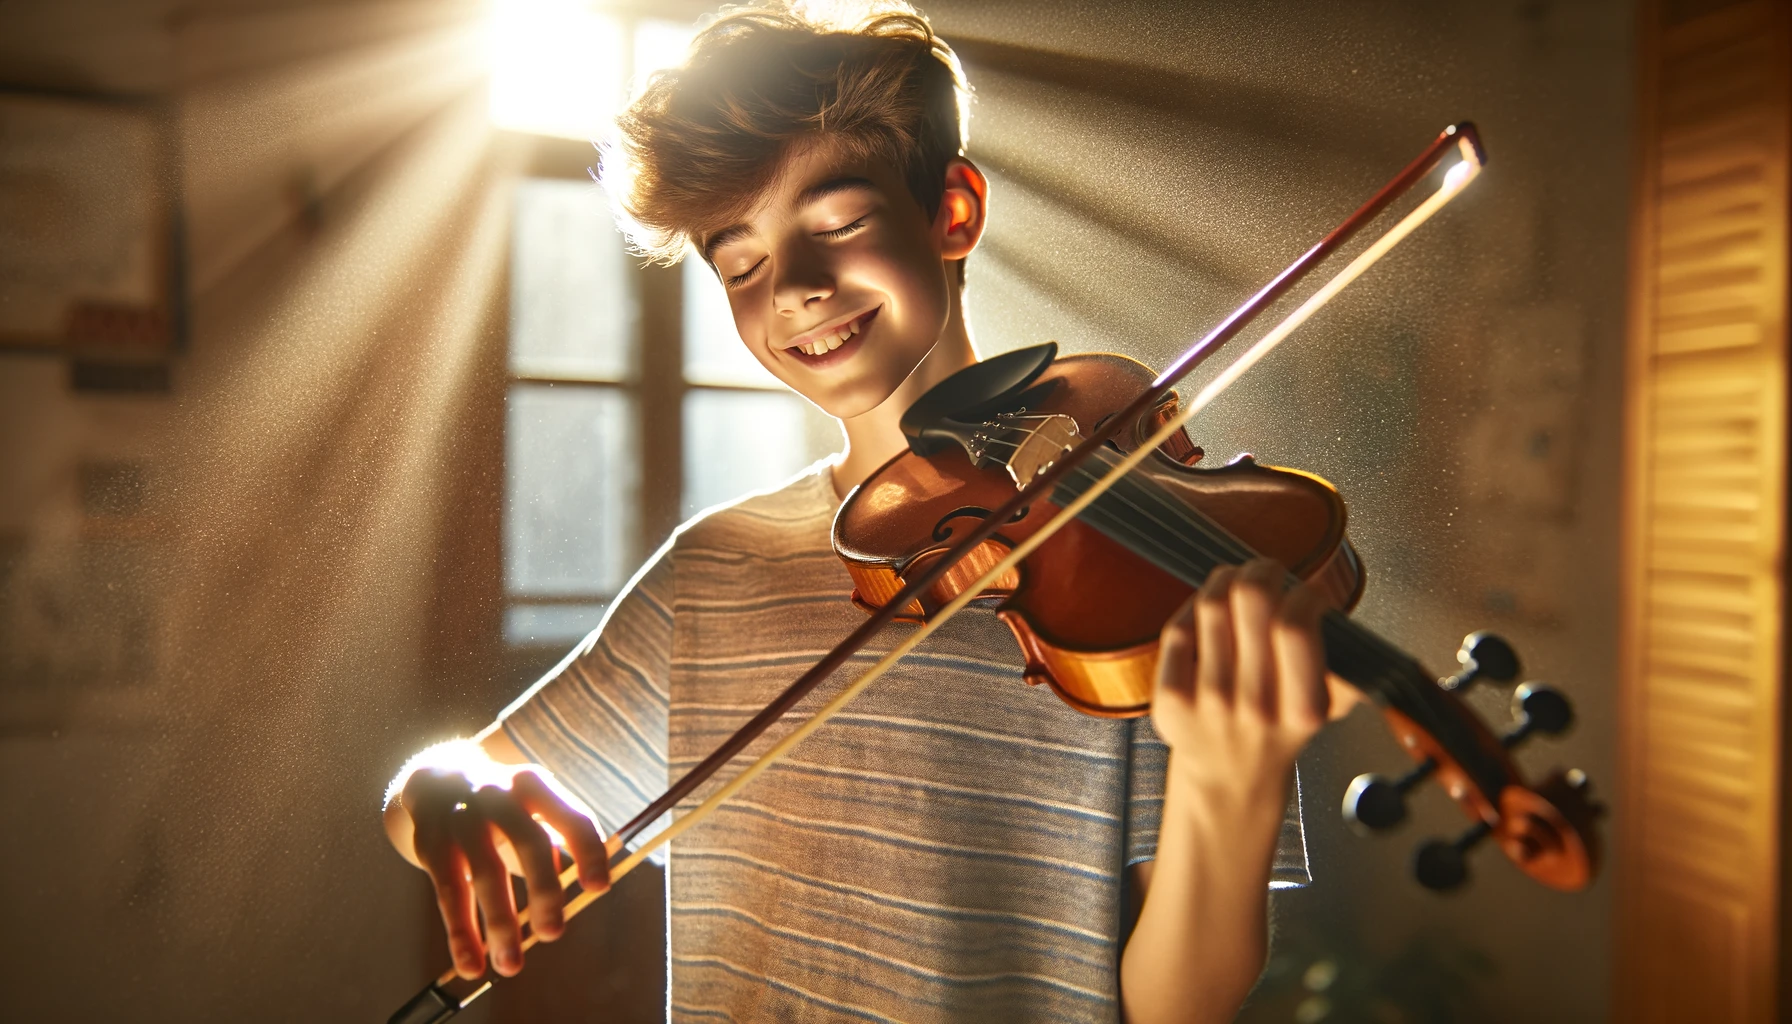 Home school student playing a violin